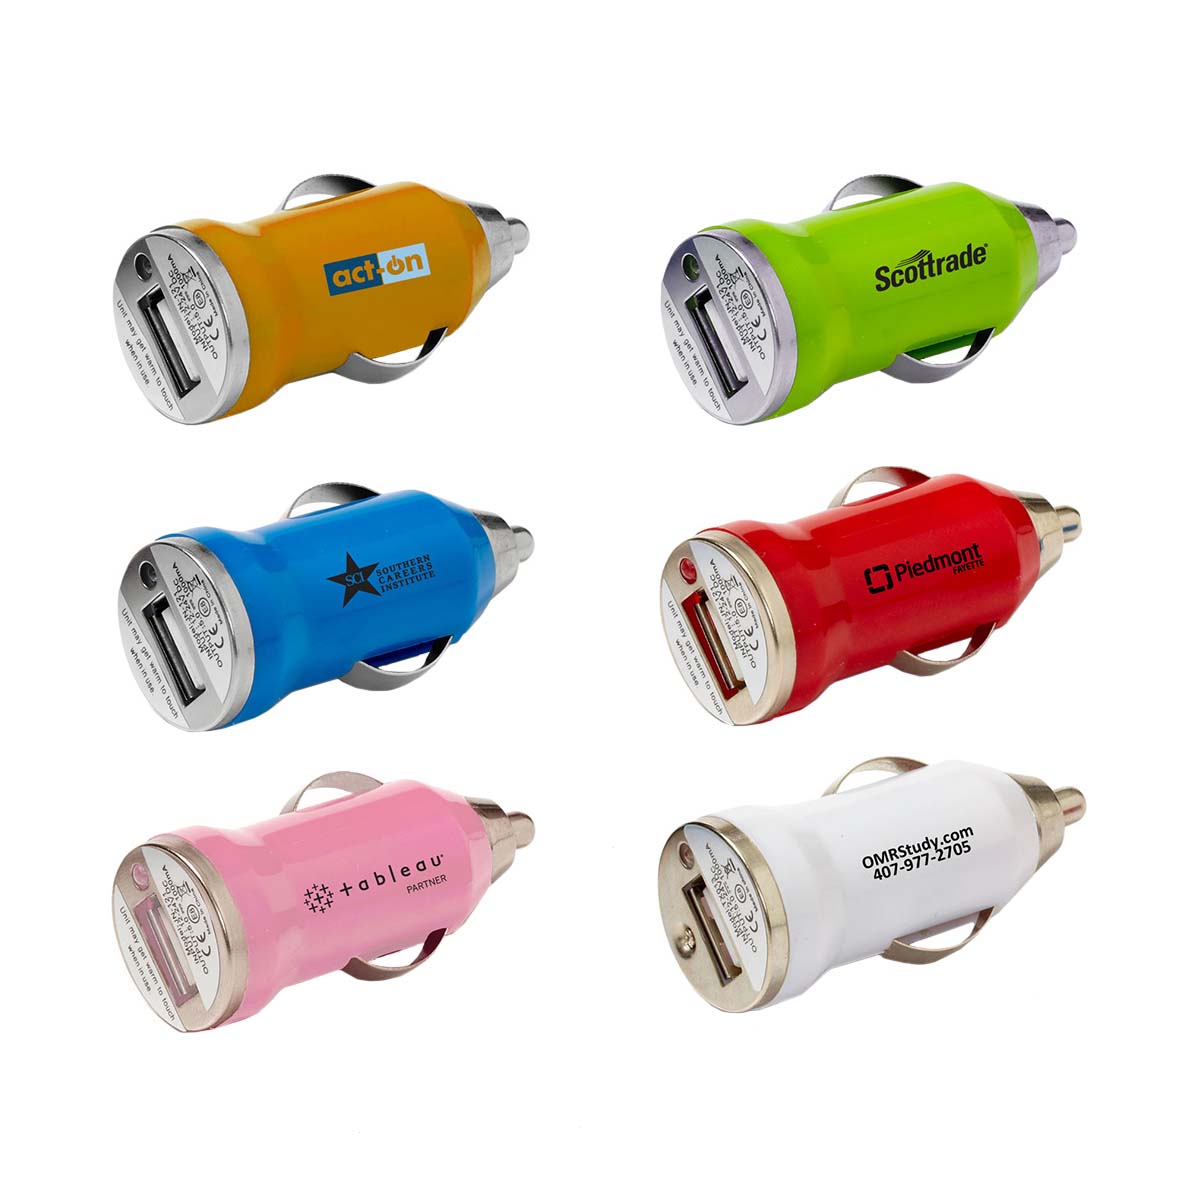 Compact USB Car Charger